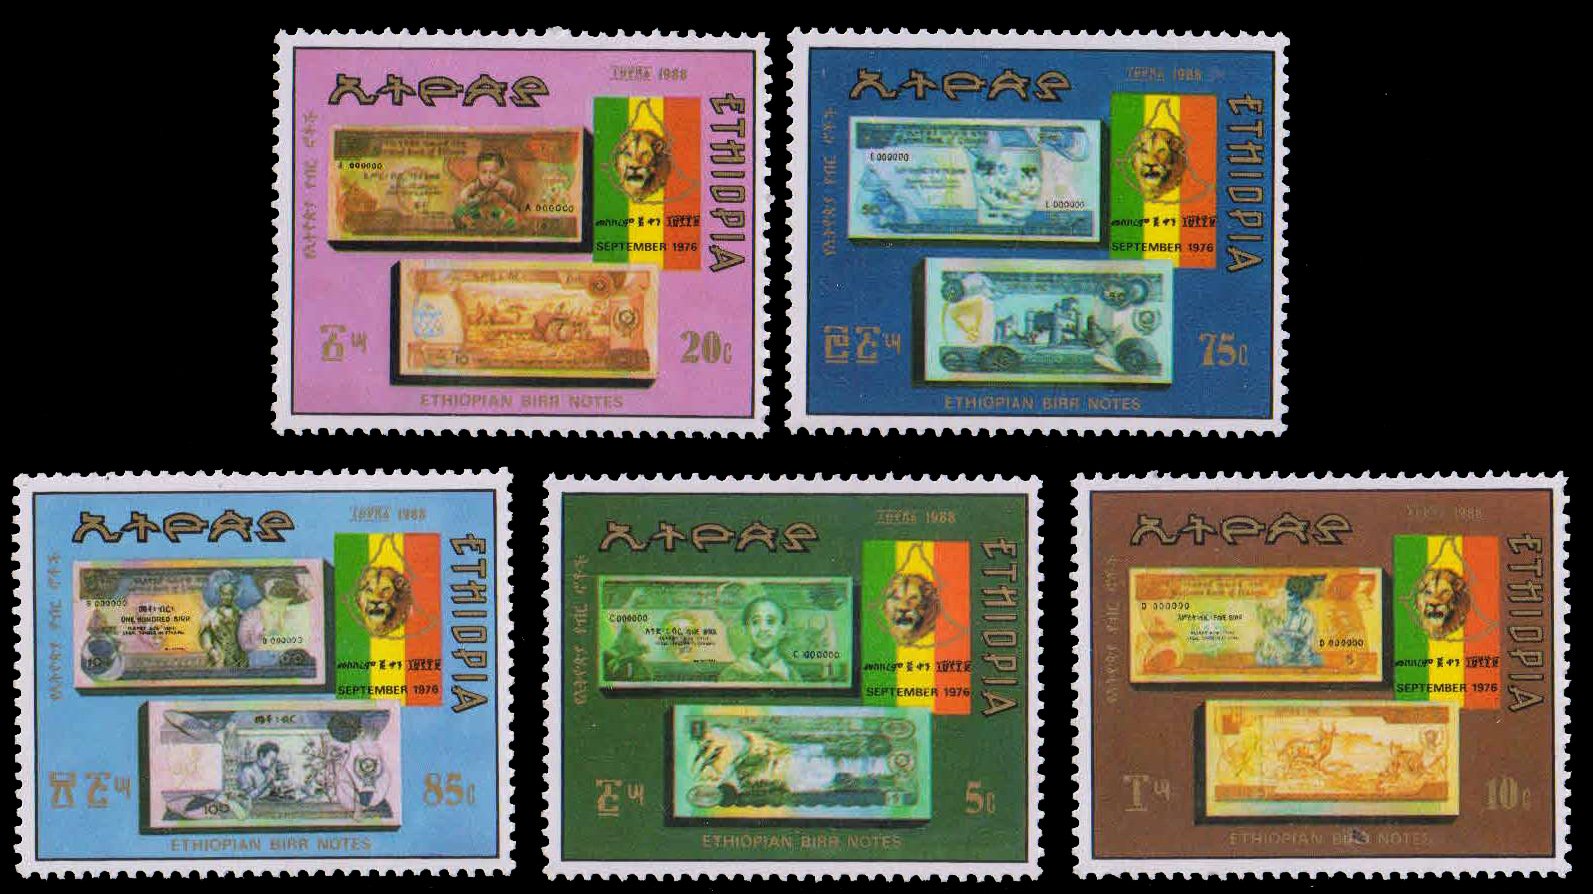 ETHIOPIA 1988-Bank Notes, Currency on Stamps-Set of 5, MNH, Cat � 12-S.G. 1420-1424